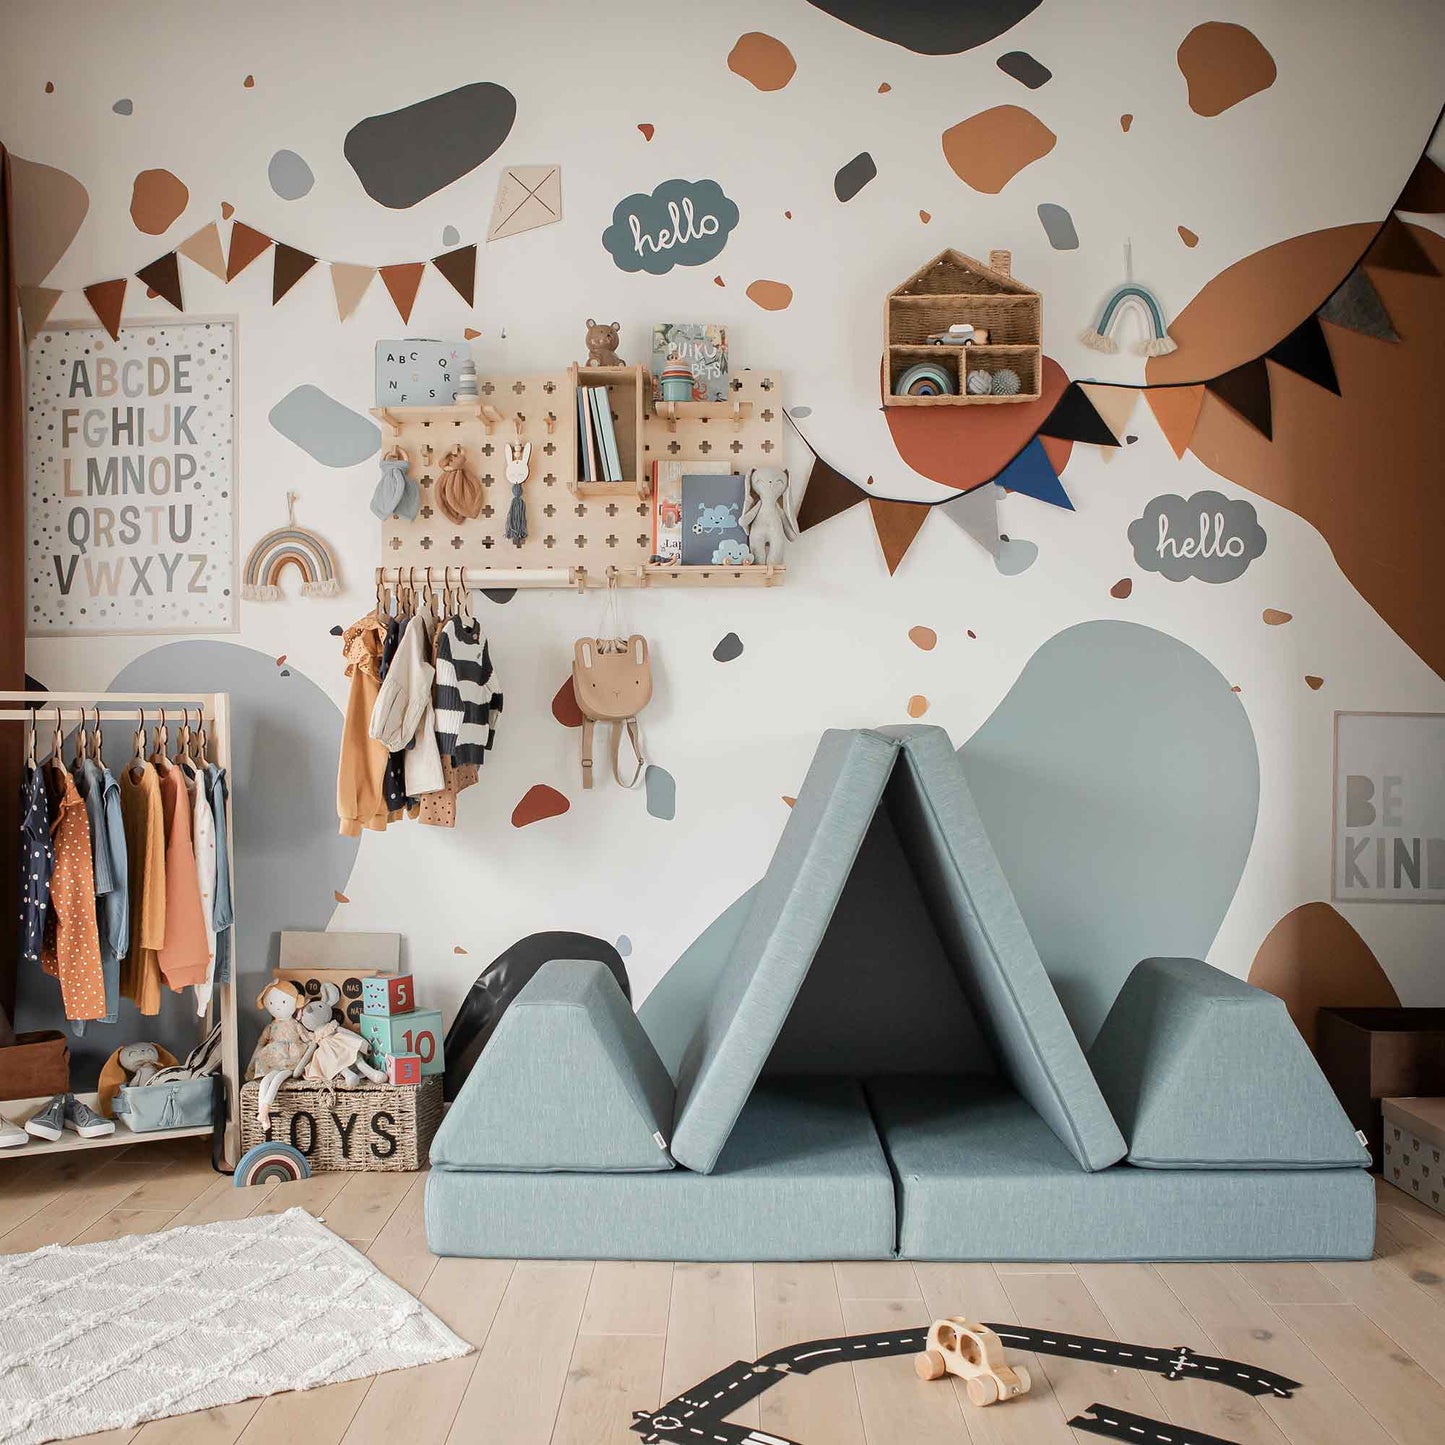 A children's playroom featuring an activity play couch set, colorful abstract wall decals, an alphabet chart, a clothes rack, and a triangular foam play structure creates a vibrant environment. A cozy play tent enhances the playful atmosphere while various toys and decorations are neatly arranged around the room—an ideal Montessori gift for imaginative young minds.